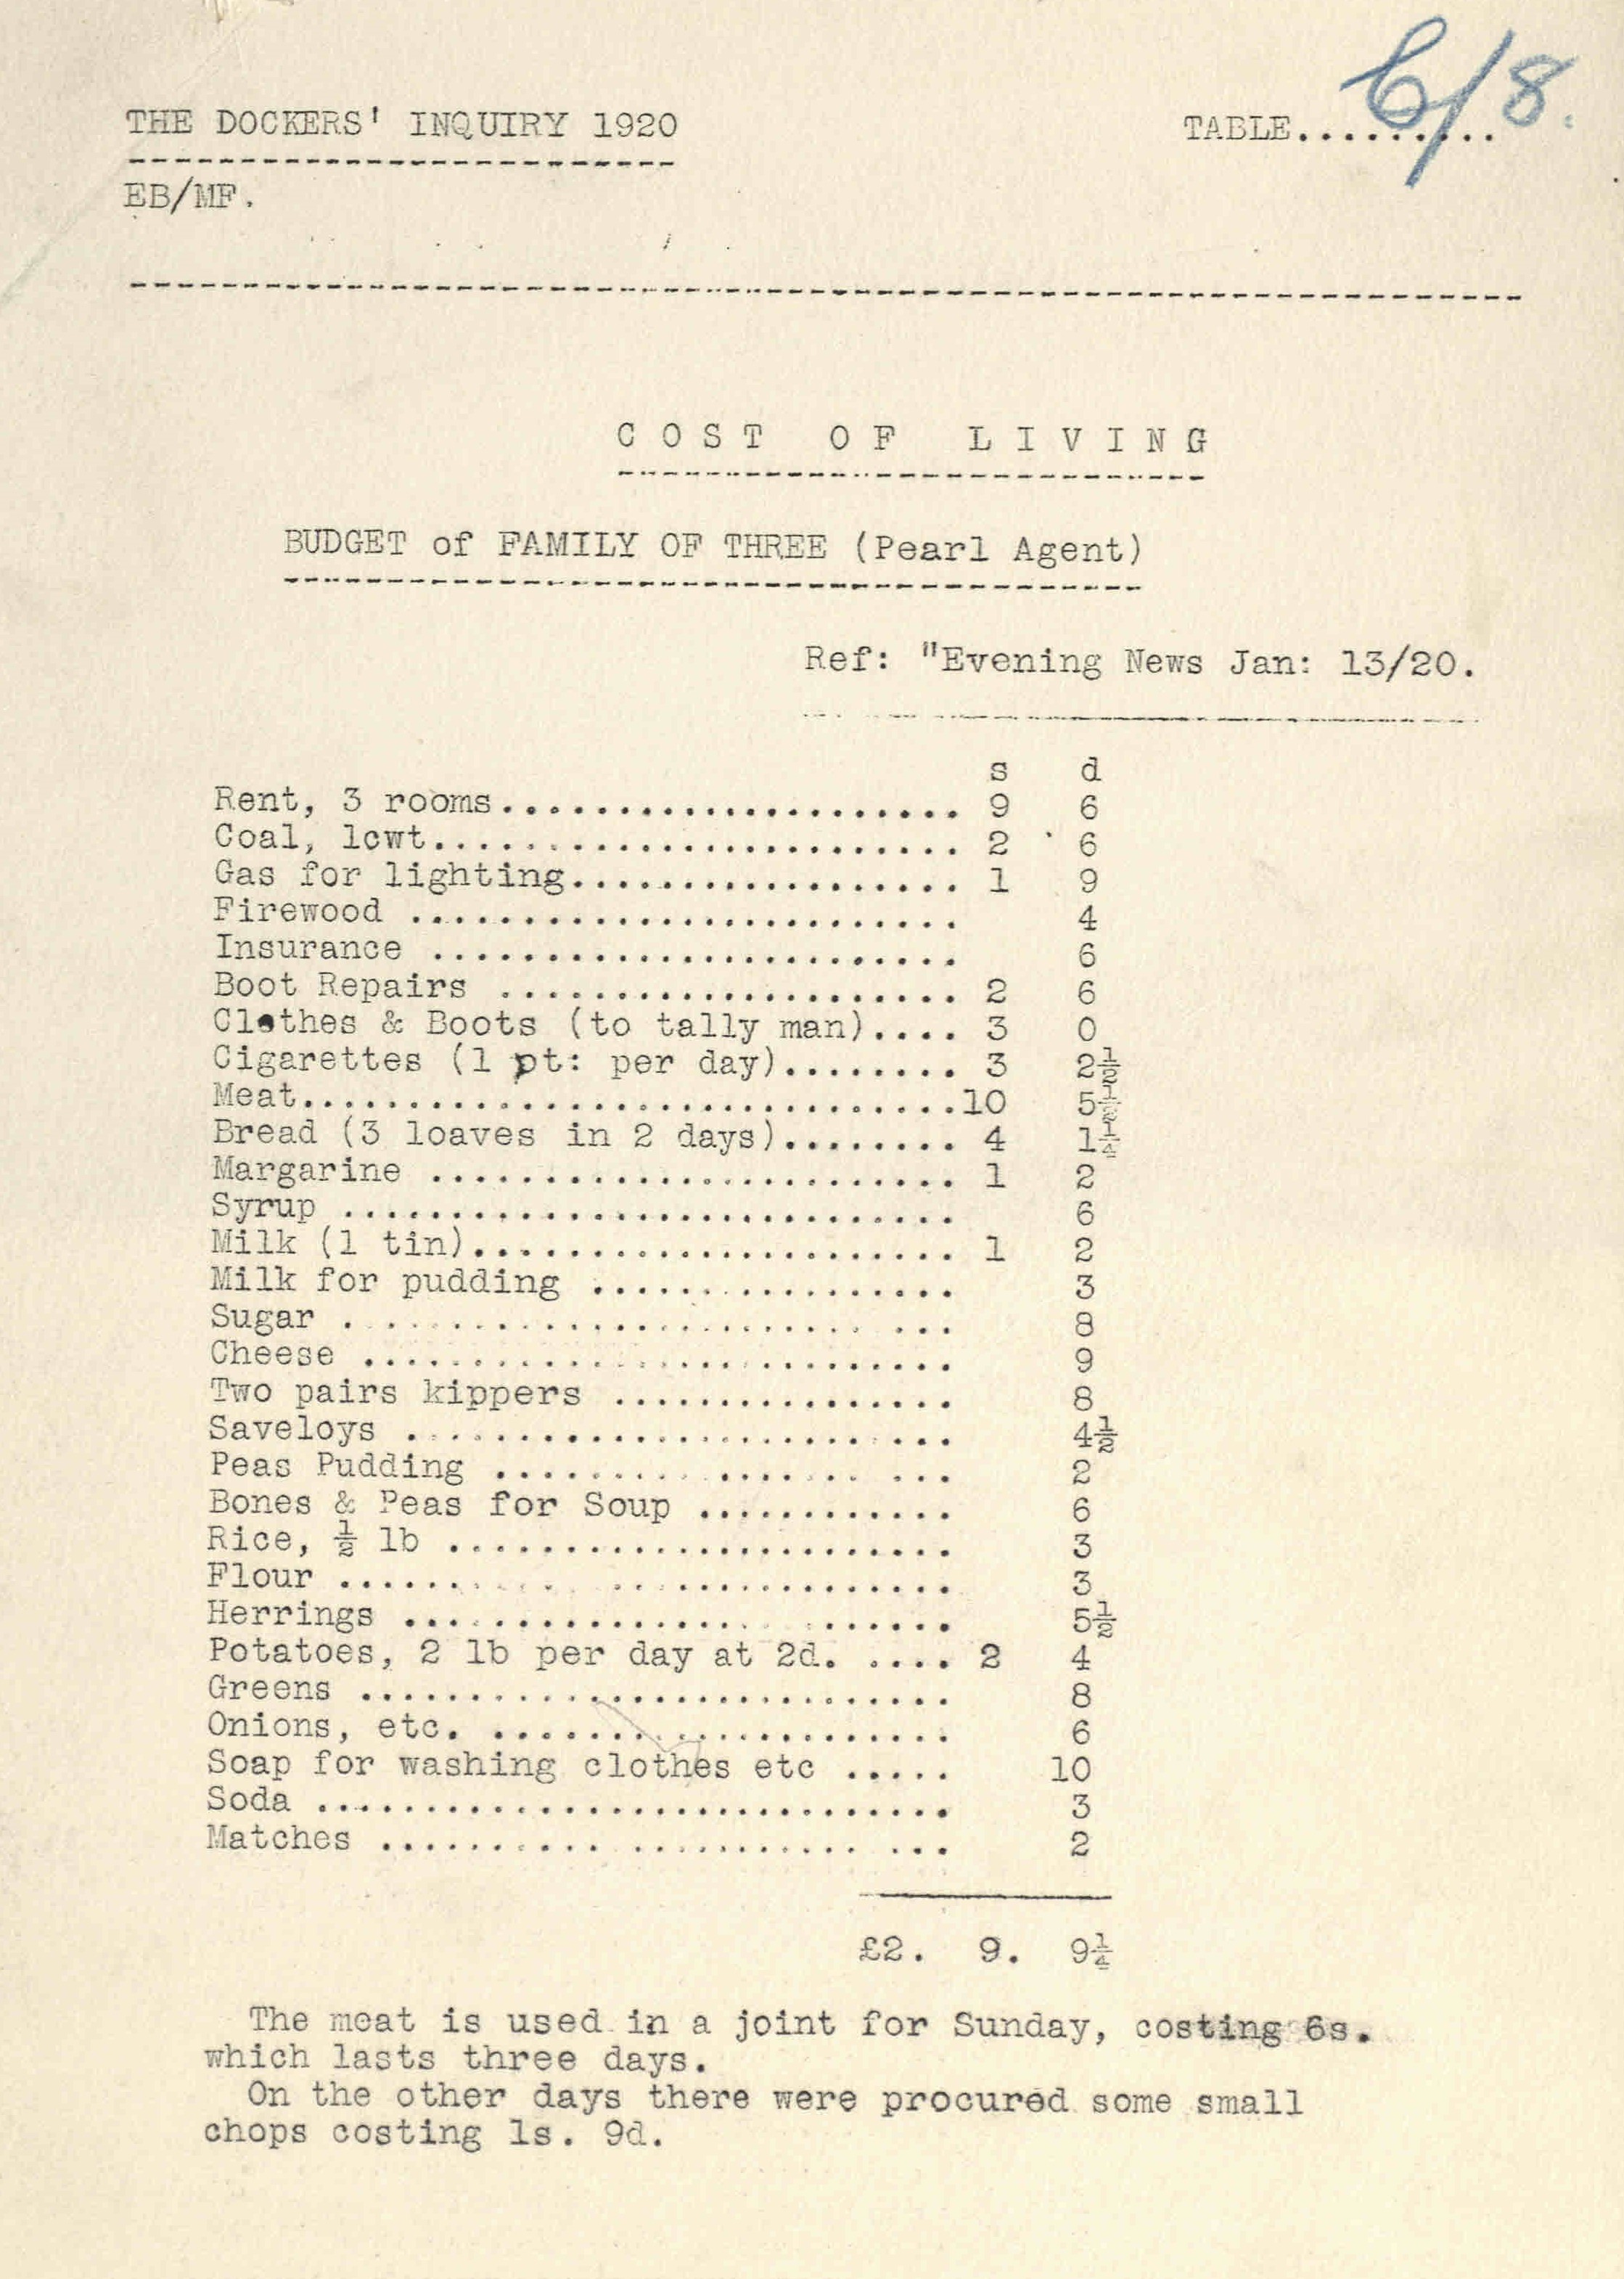 Weekly budget of a family of three (wage earner employed by Pearl Assurance), copied from the Evening News, 13 January 1920